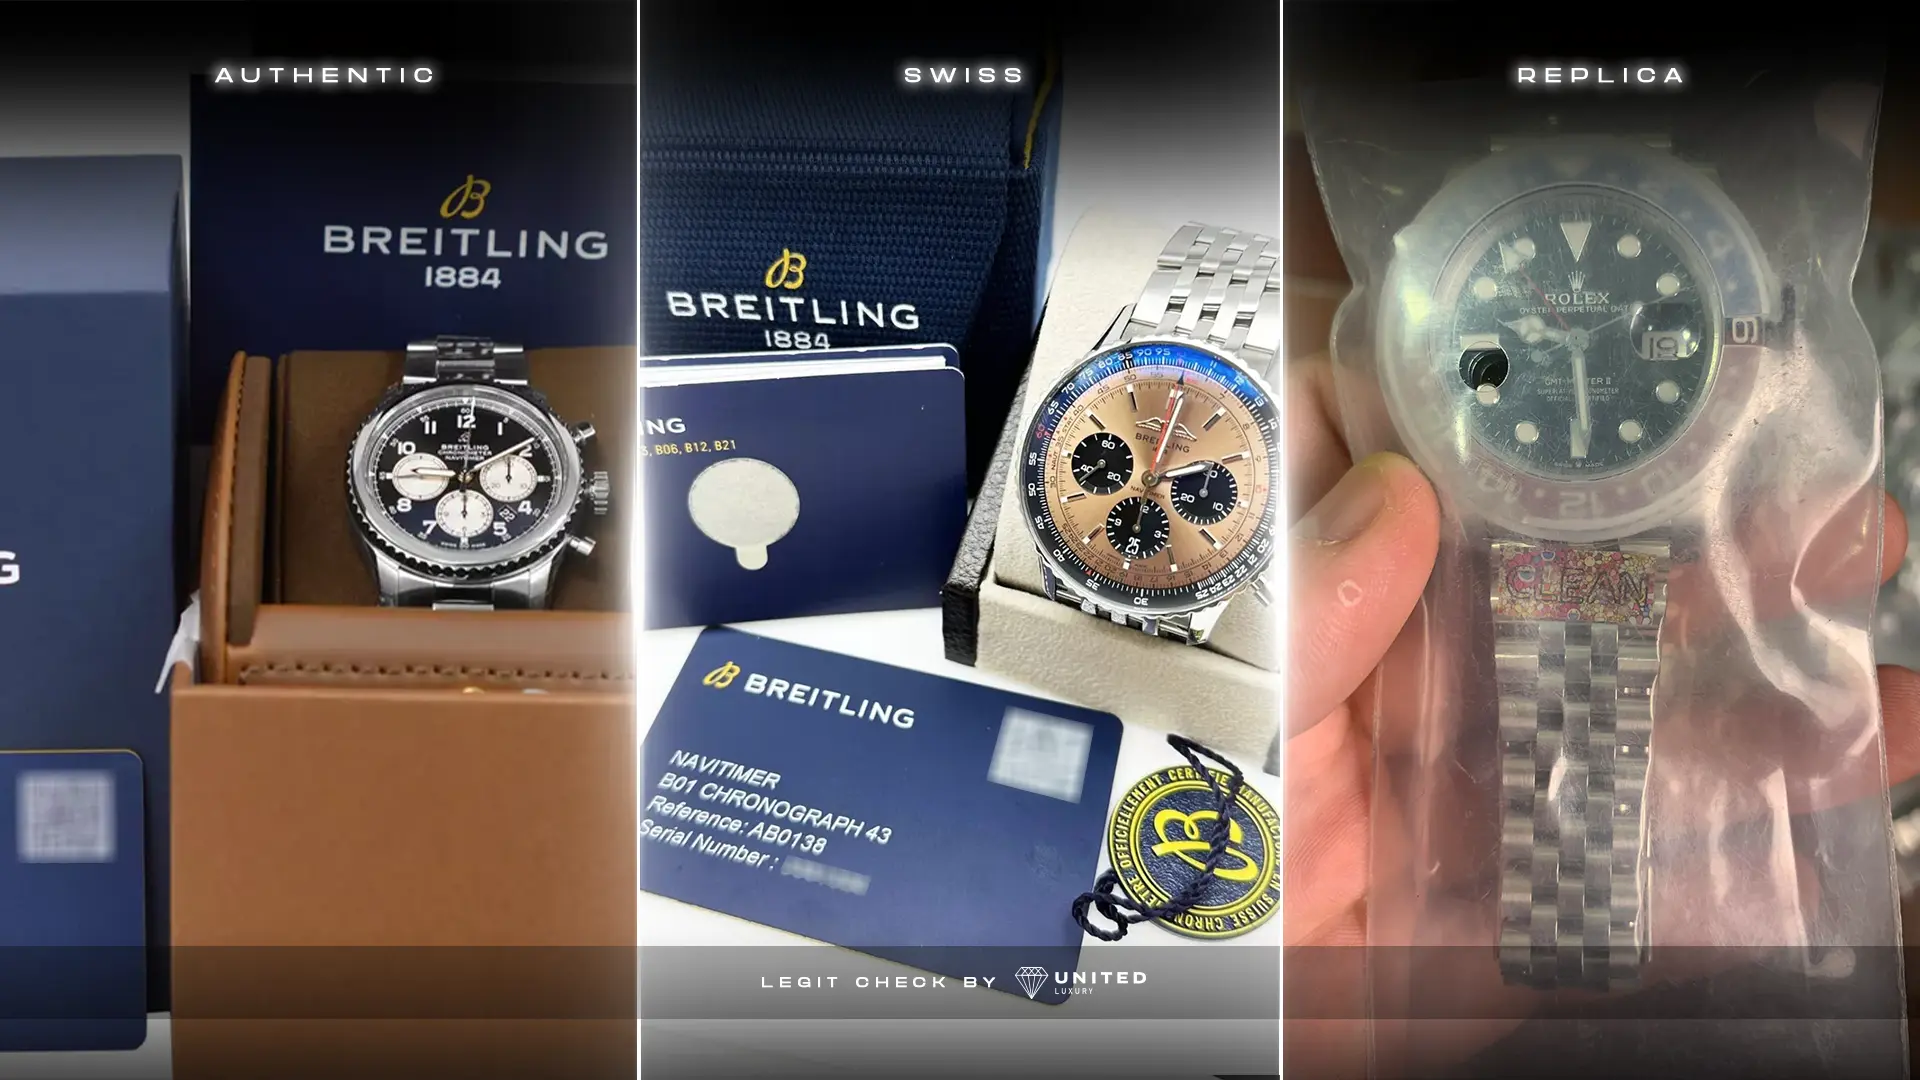 breitling authentic, swiss, replica watch product packaging